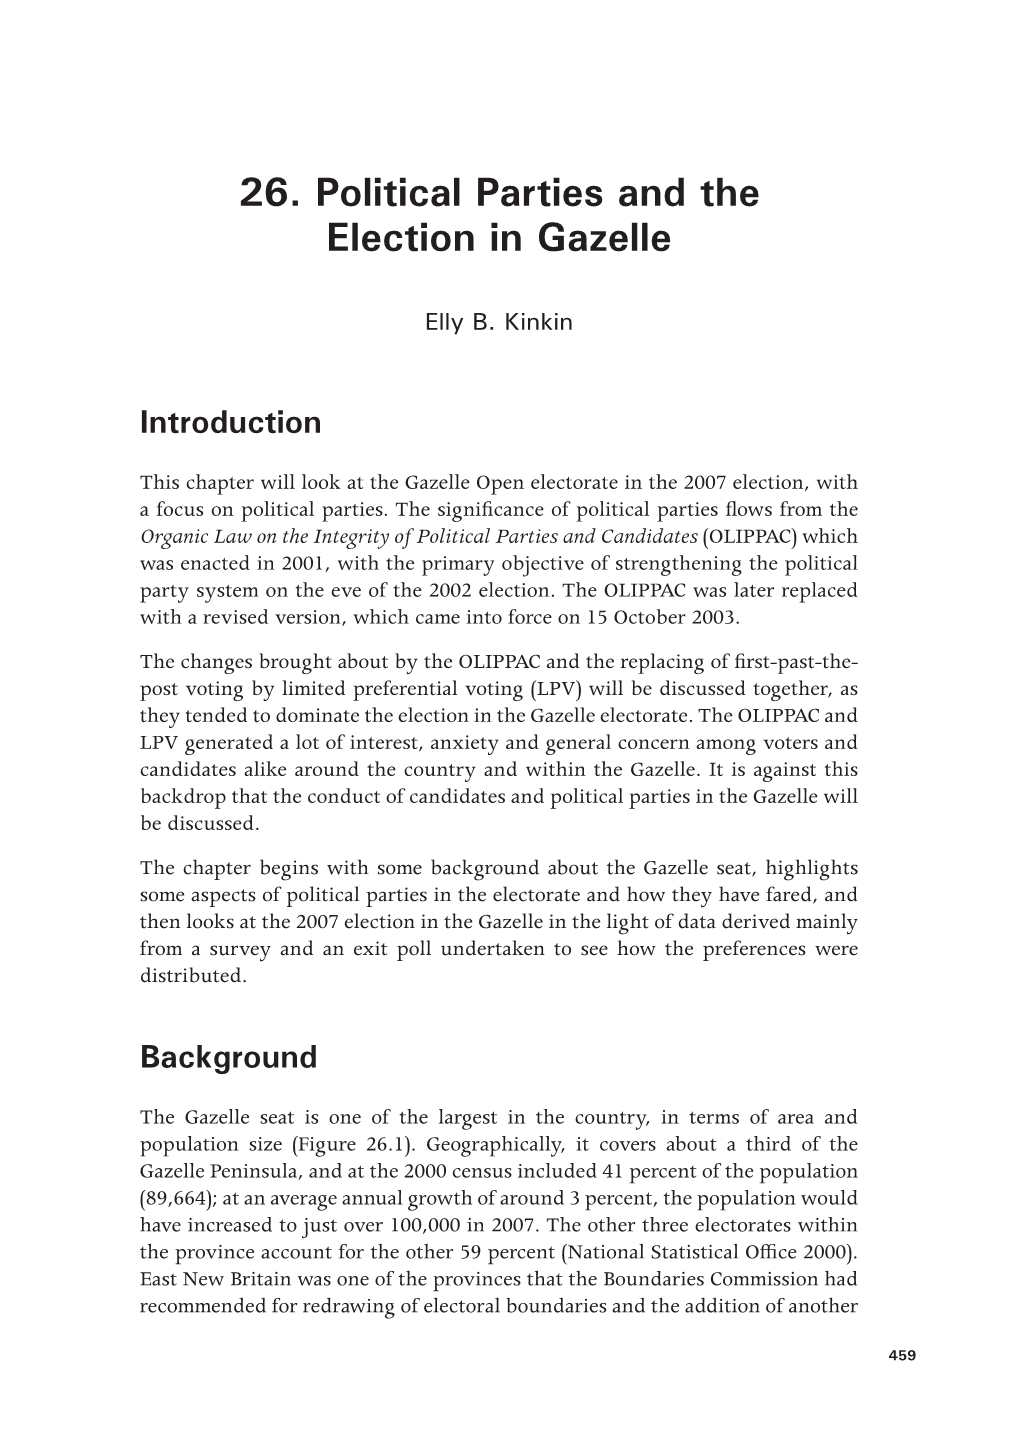 26. Political Parties and the Election in Gazelle